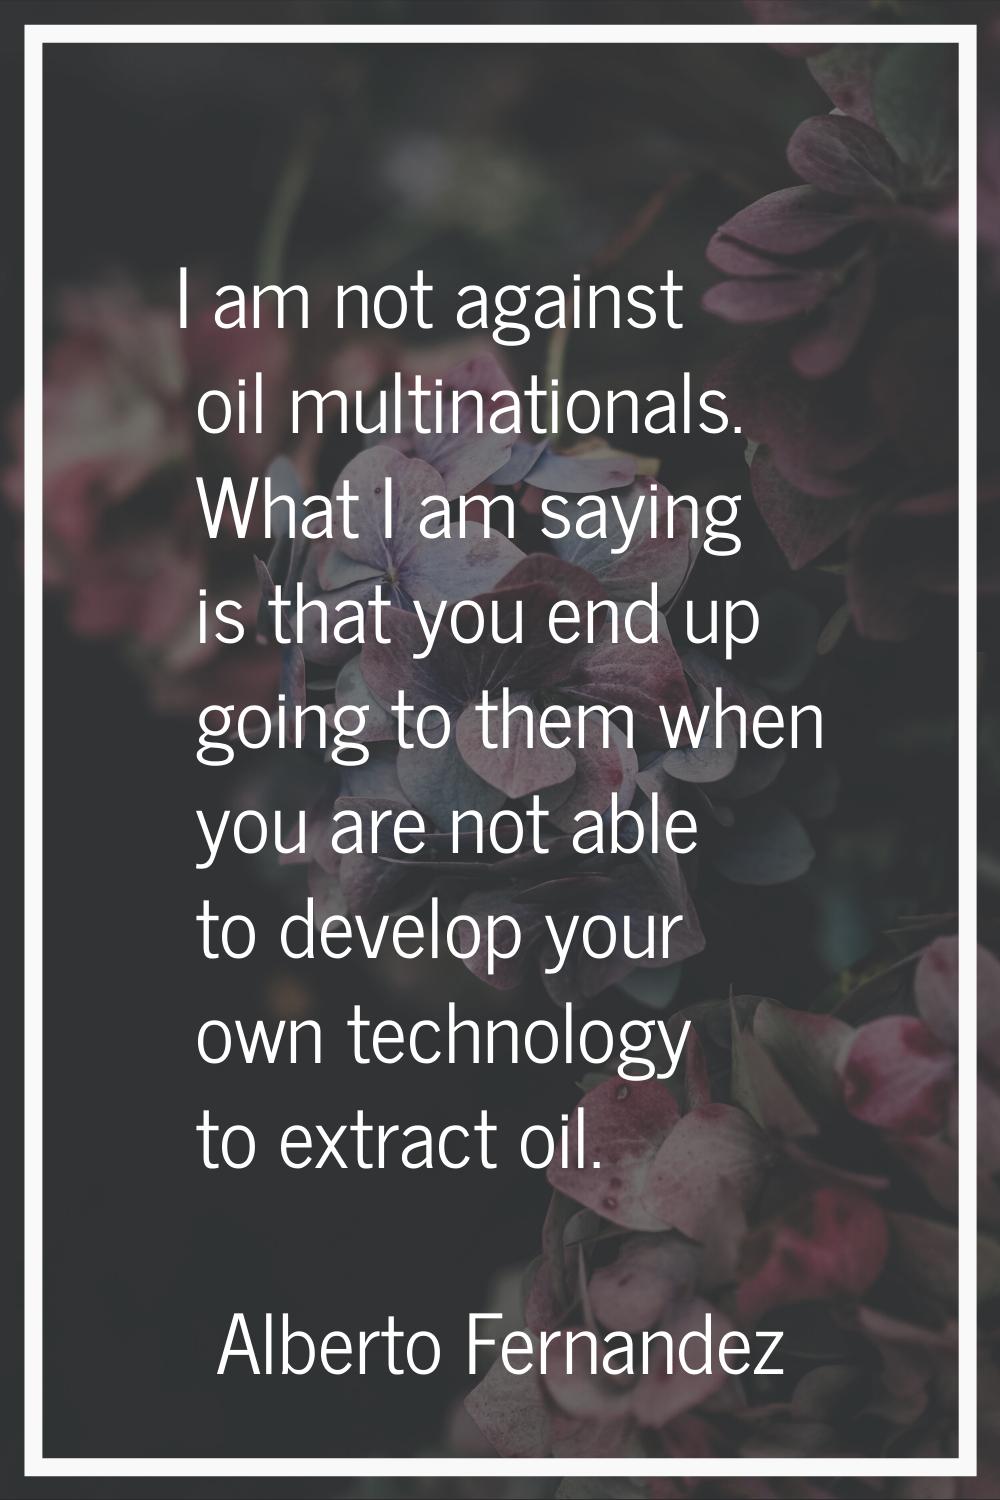 I am not against oil multinationals. What I am saying is that you end up going to them when you are